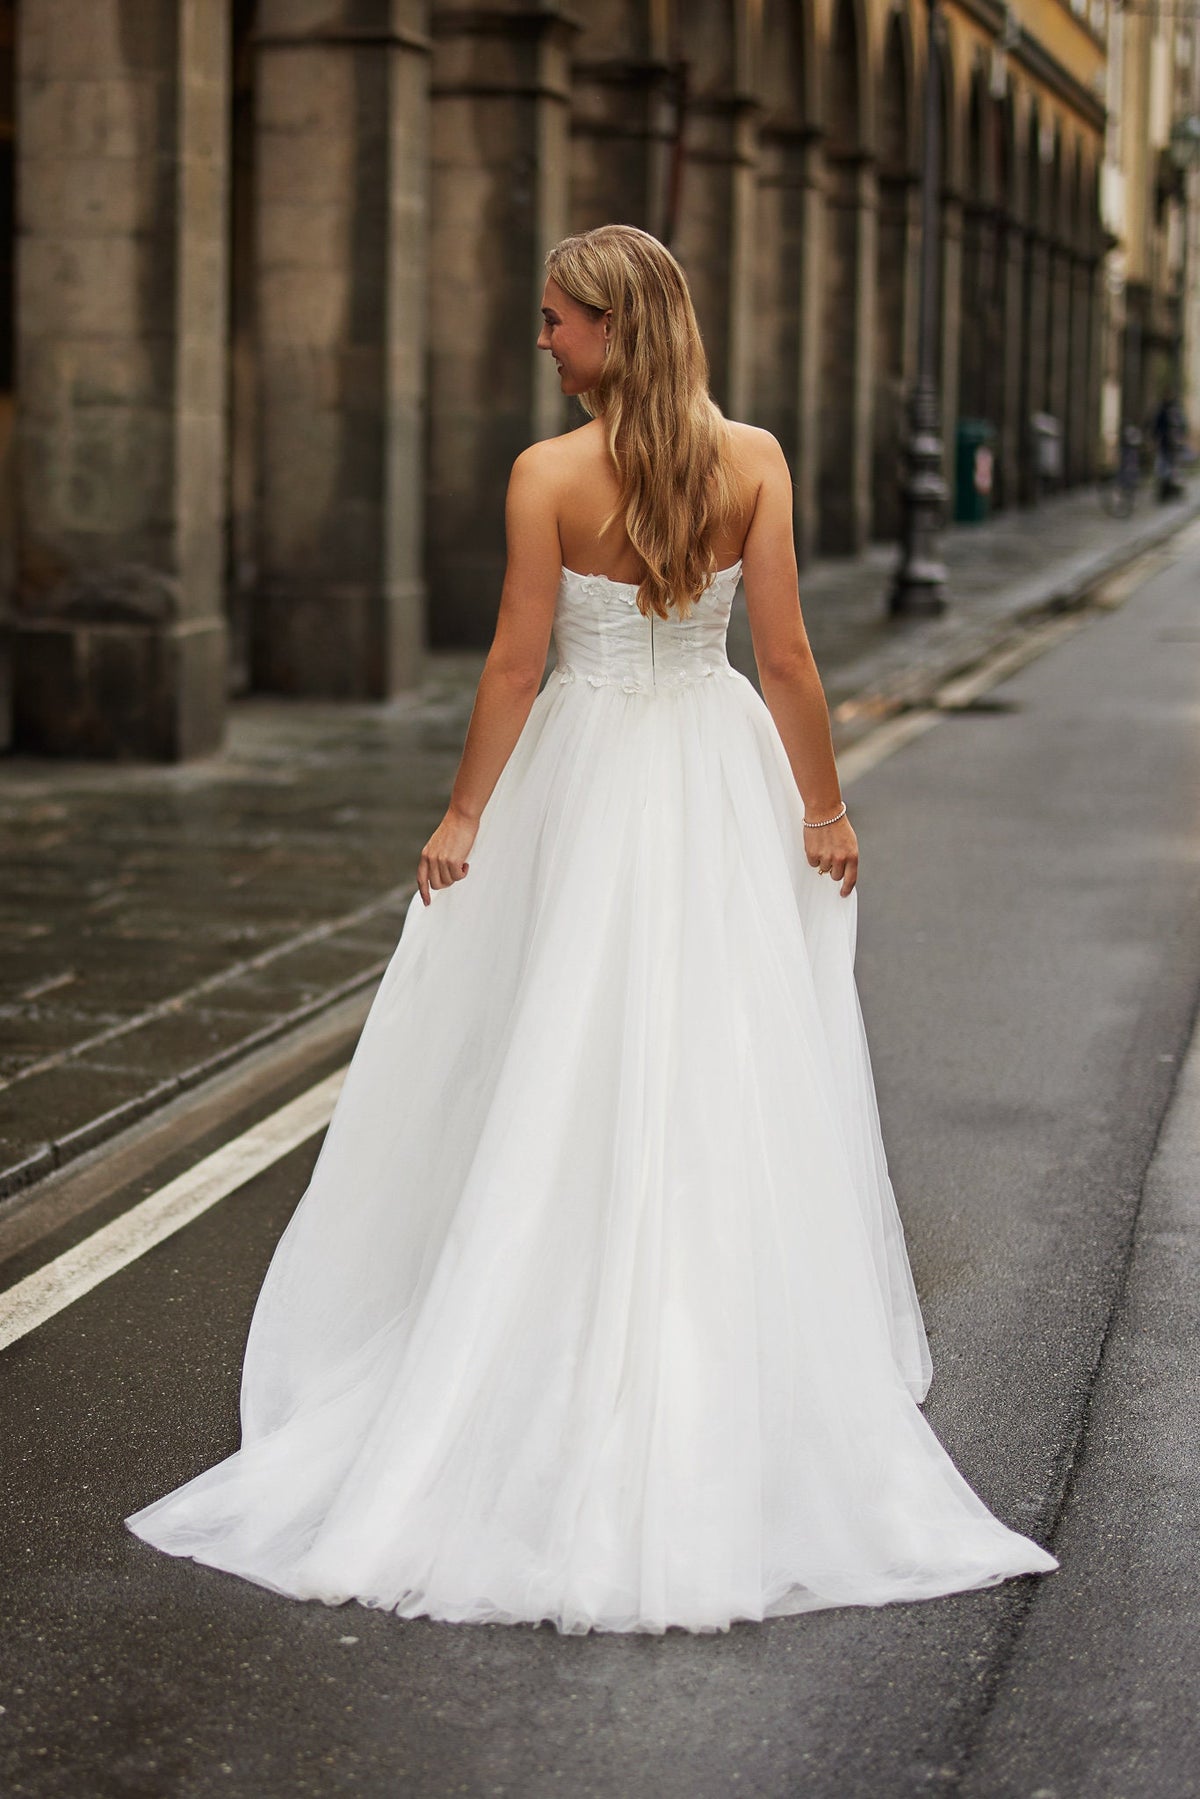 Charming Off-Shoulder A-Line Wedding Dress with Detachable Sheer Sleeves and Lace Bodice Bridal Gown